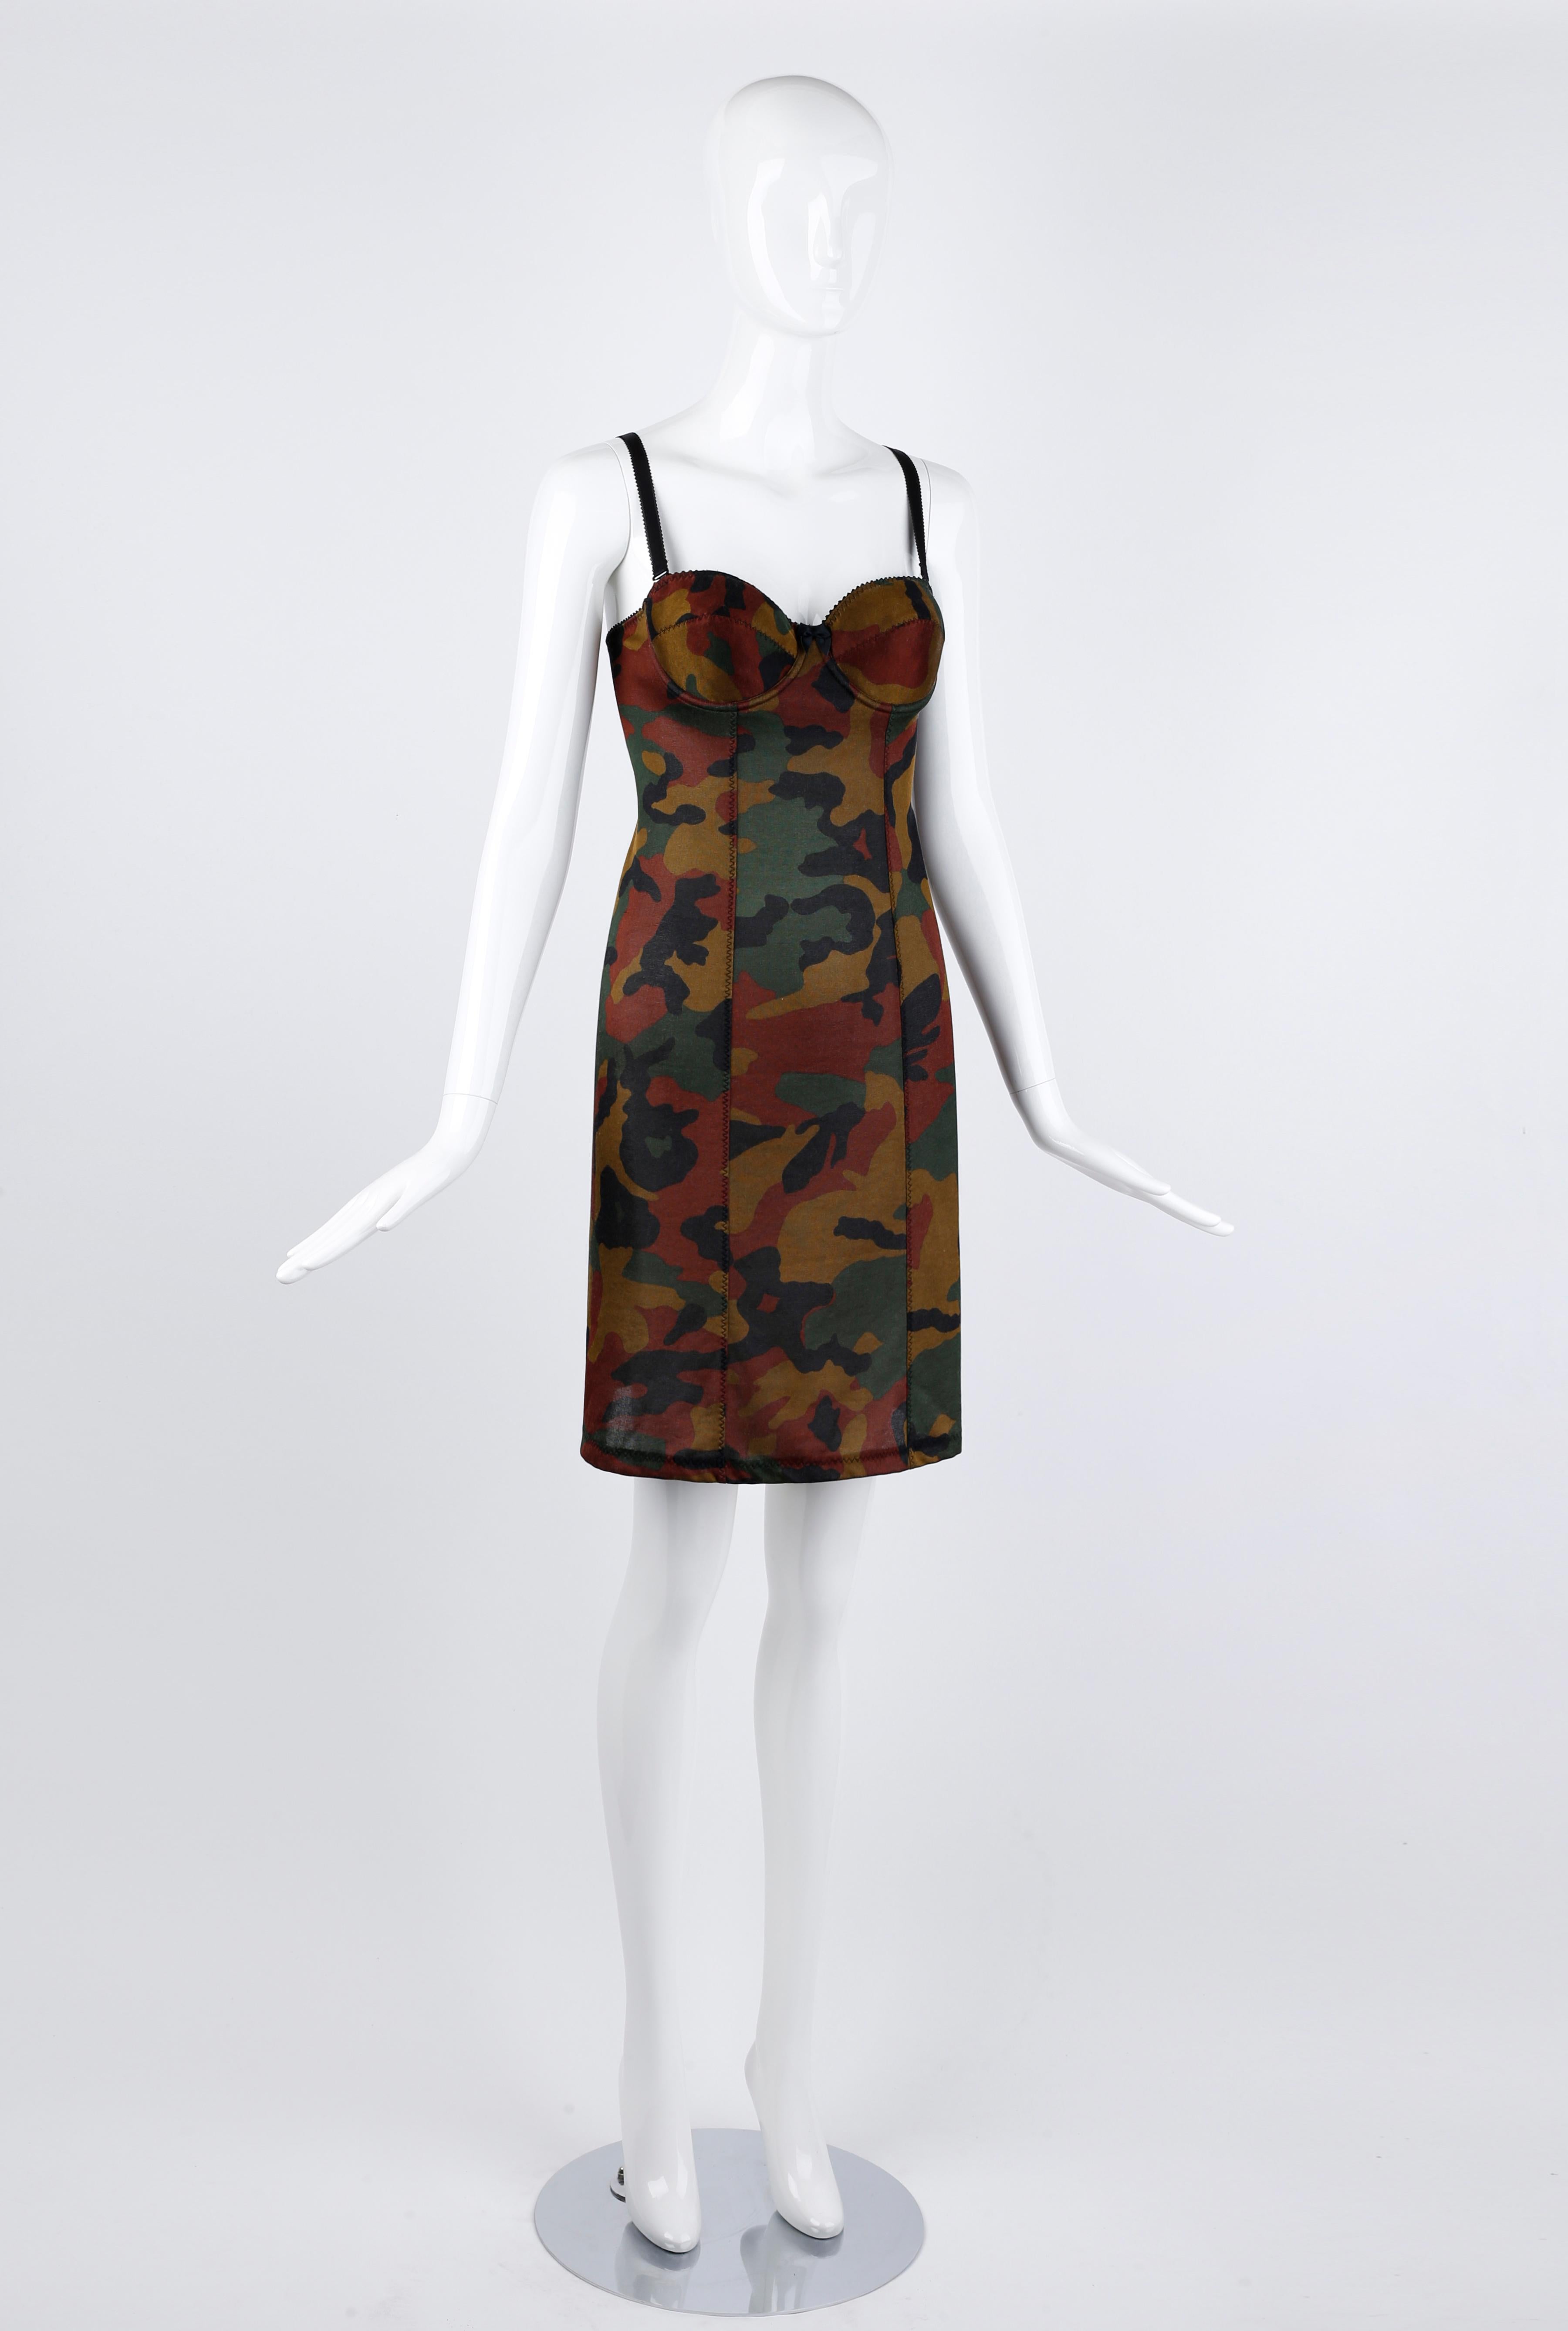 Jean Paul Gaultier Vintage Camouflage Print Stretch Bustier Mini Dress  In Good Condition For Sale In Chicago, IL